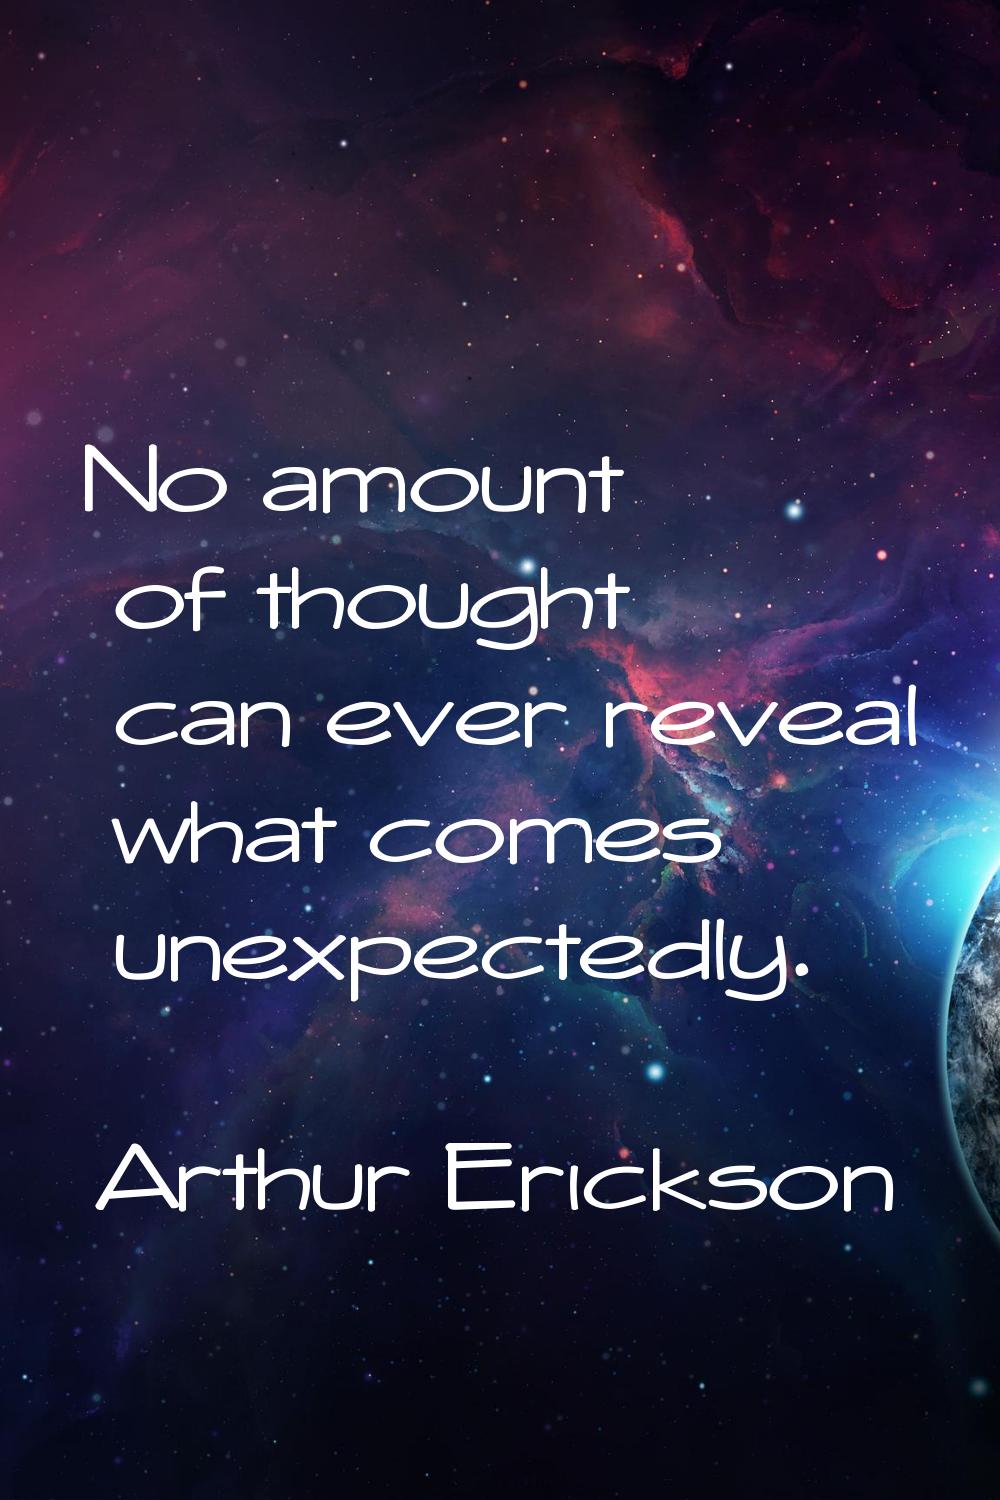 No amount of thought can ever reveal what comes unexpectedly.